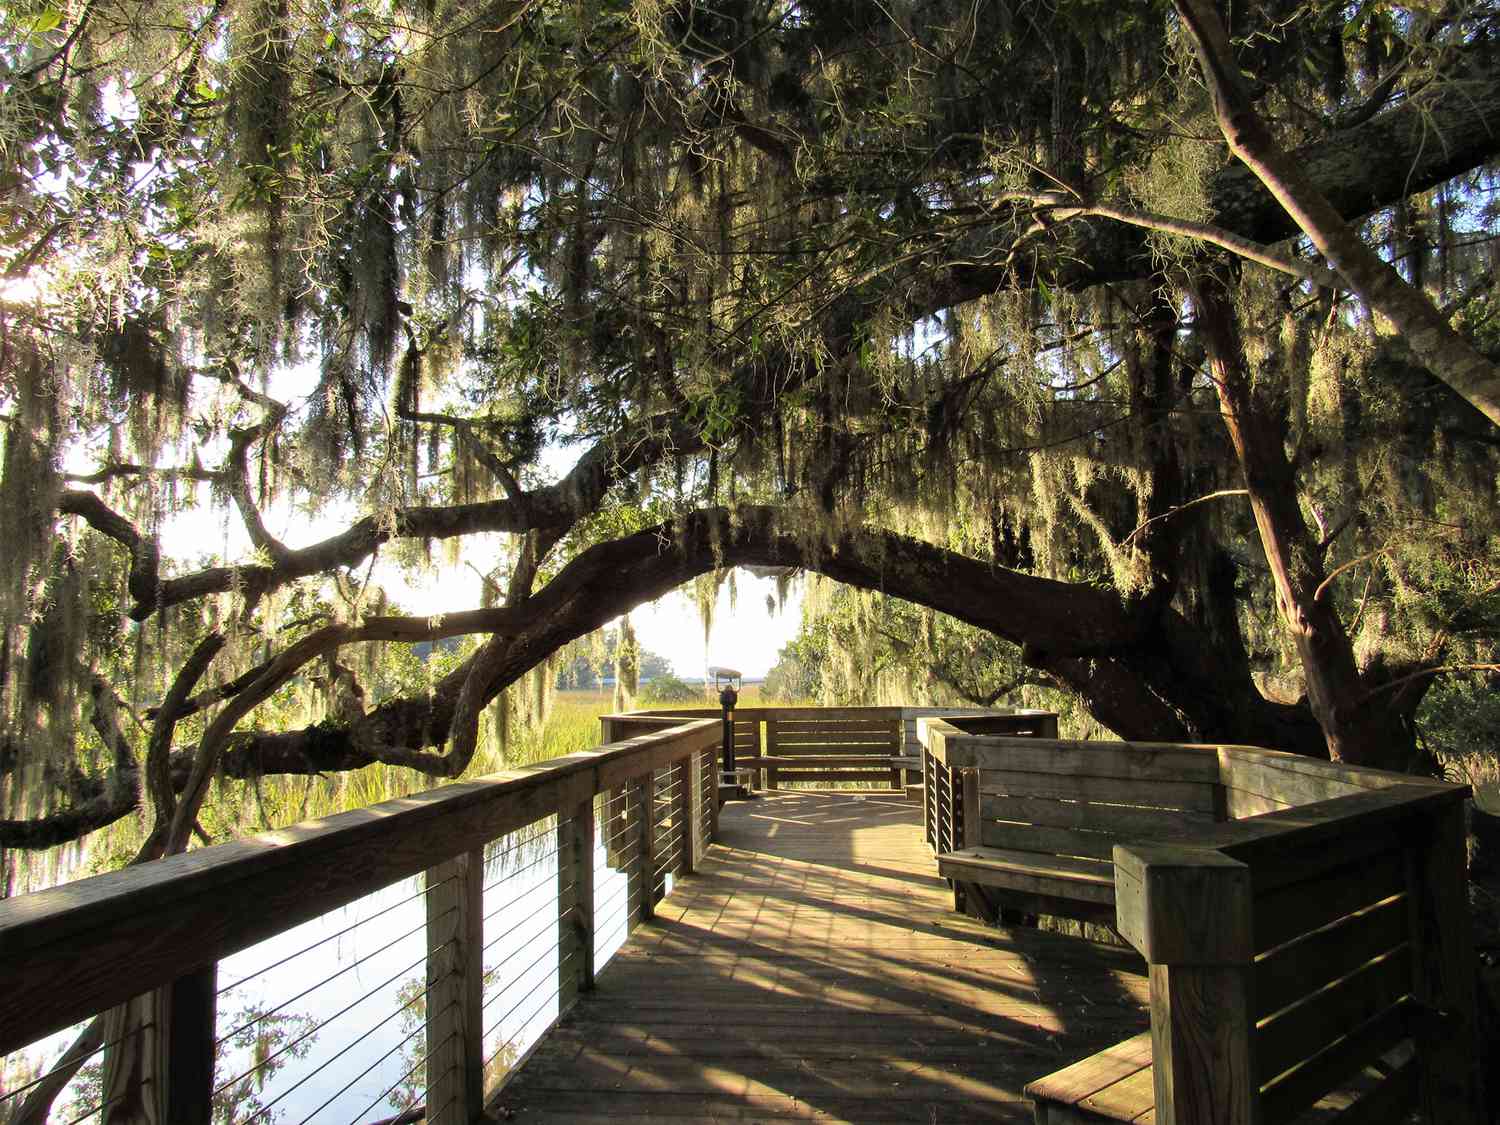 13-facts-about-local-wildlife-and-natural-reserves-in-hilton-head-island-south-carolina